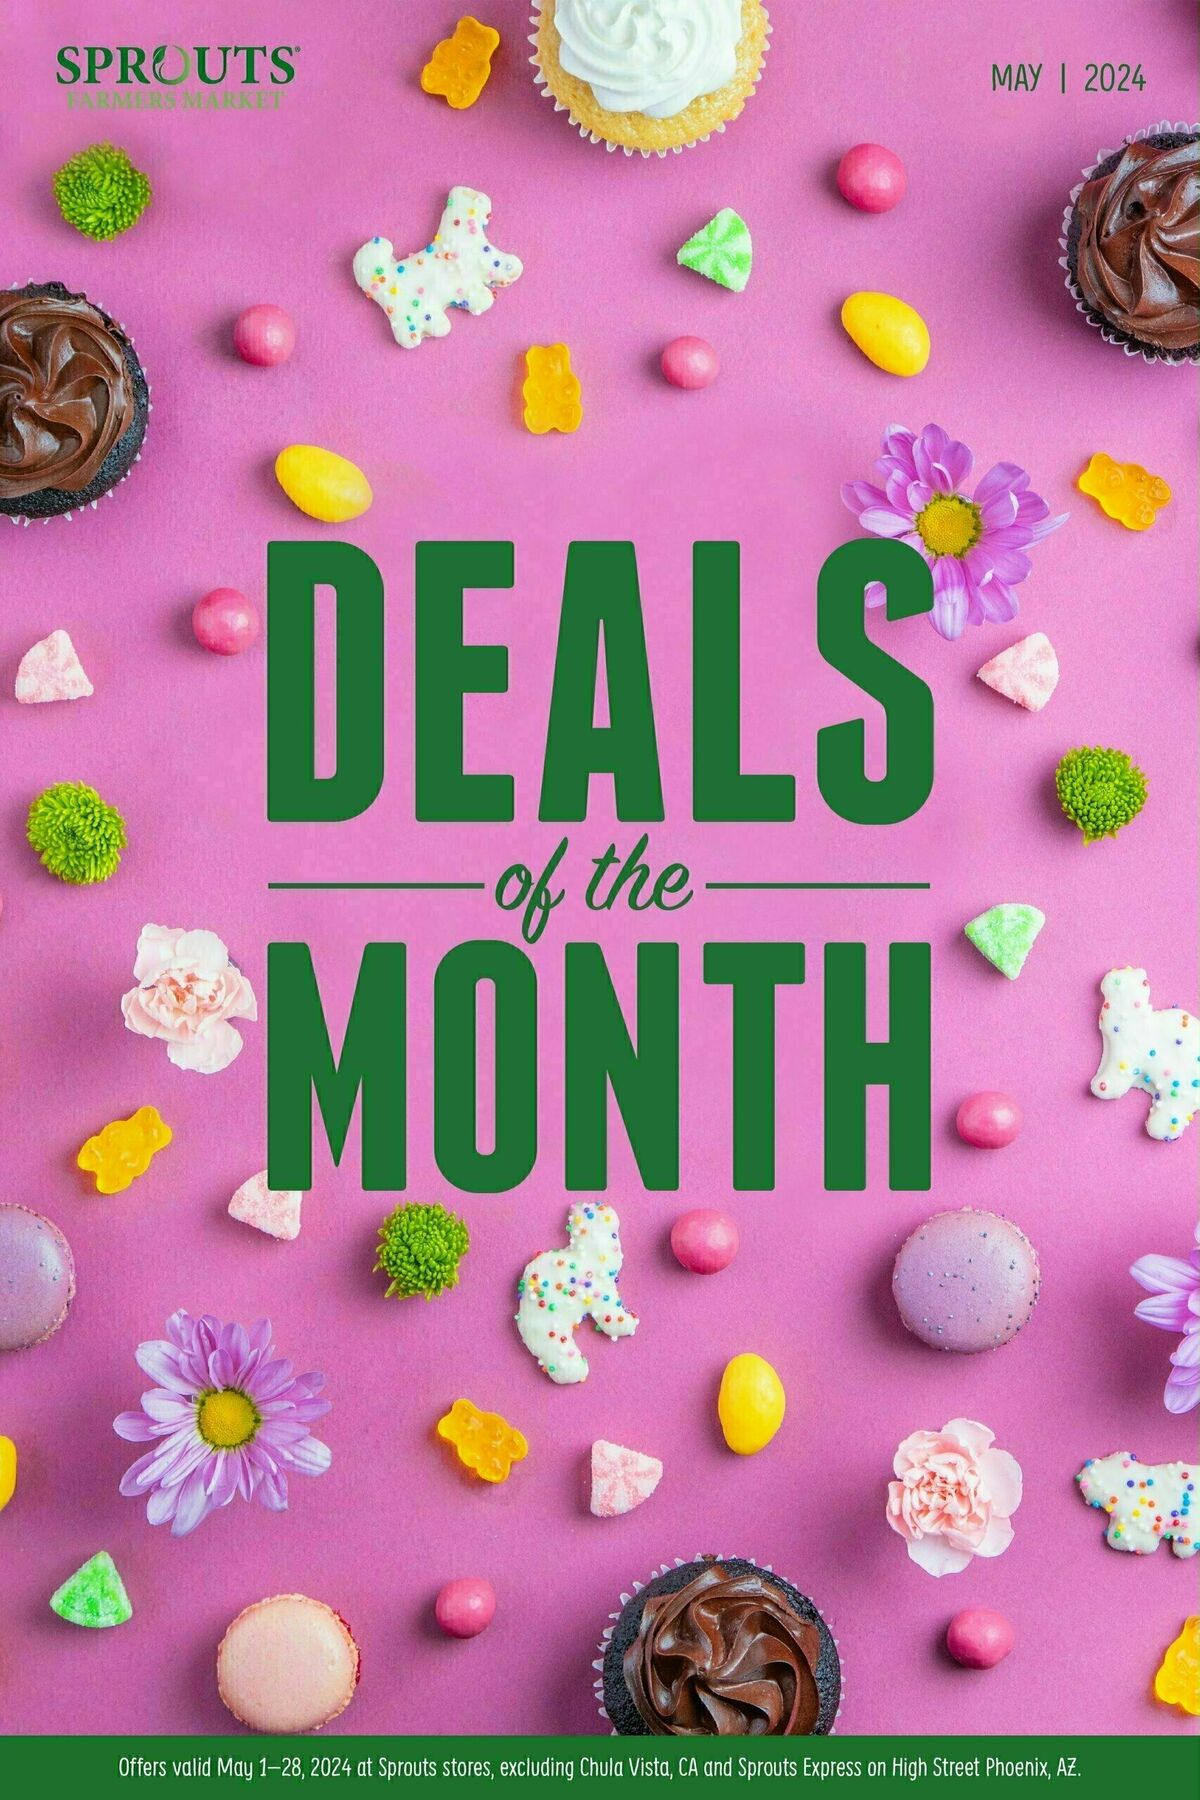 Sprouts Farmers Market Deals of the Month Weekly Ad from May 1